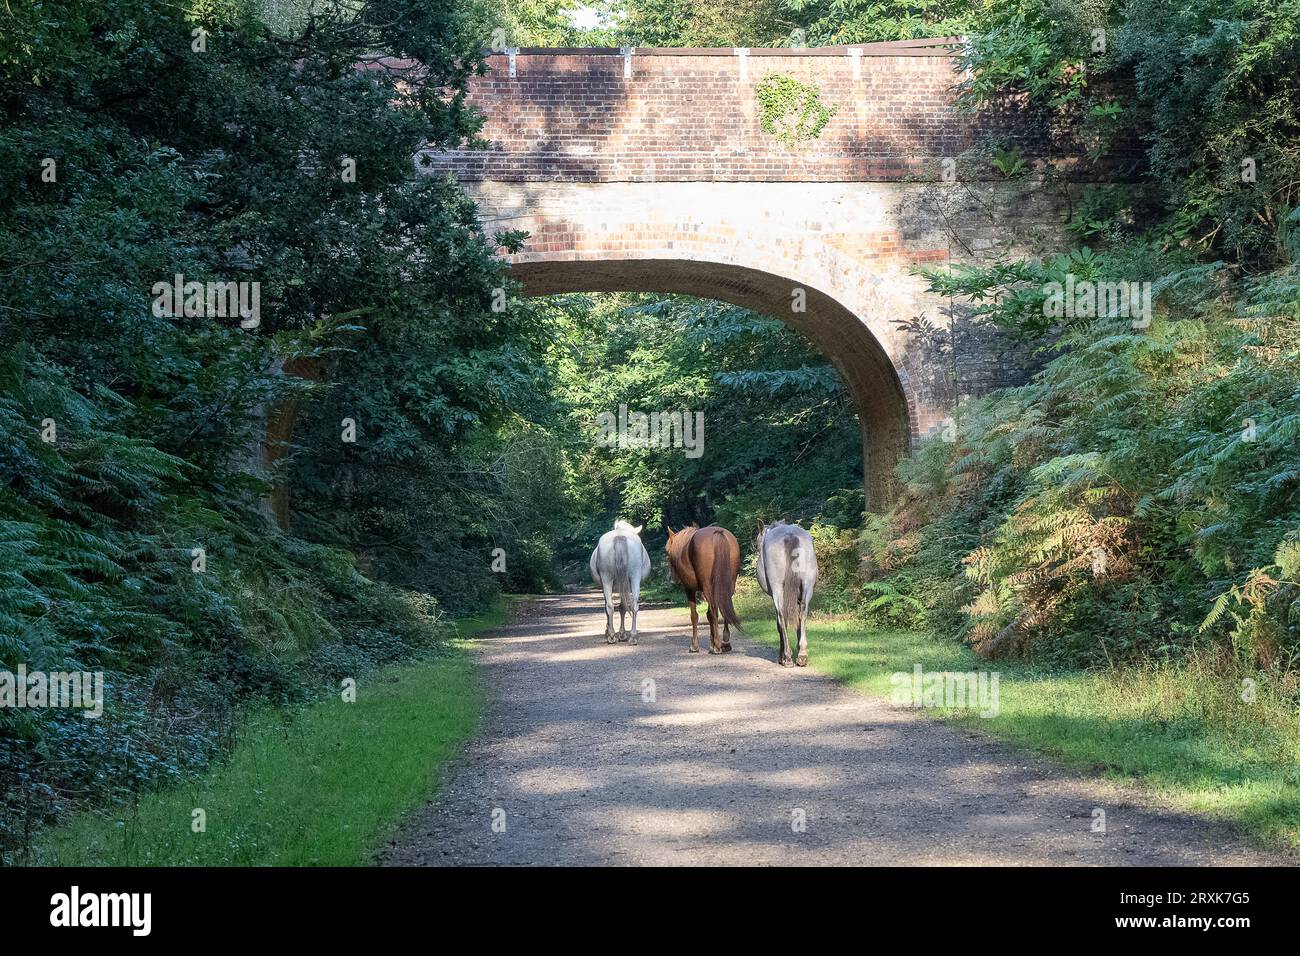 The New Forest National Park, Hampshire, Wild ponies roaming freely in their natural habitat, a trio of ponies walking under a bridge Stock Photo